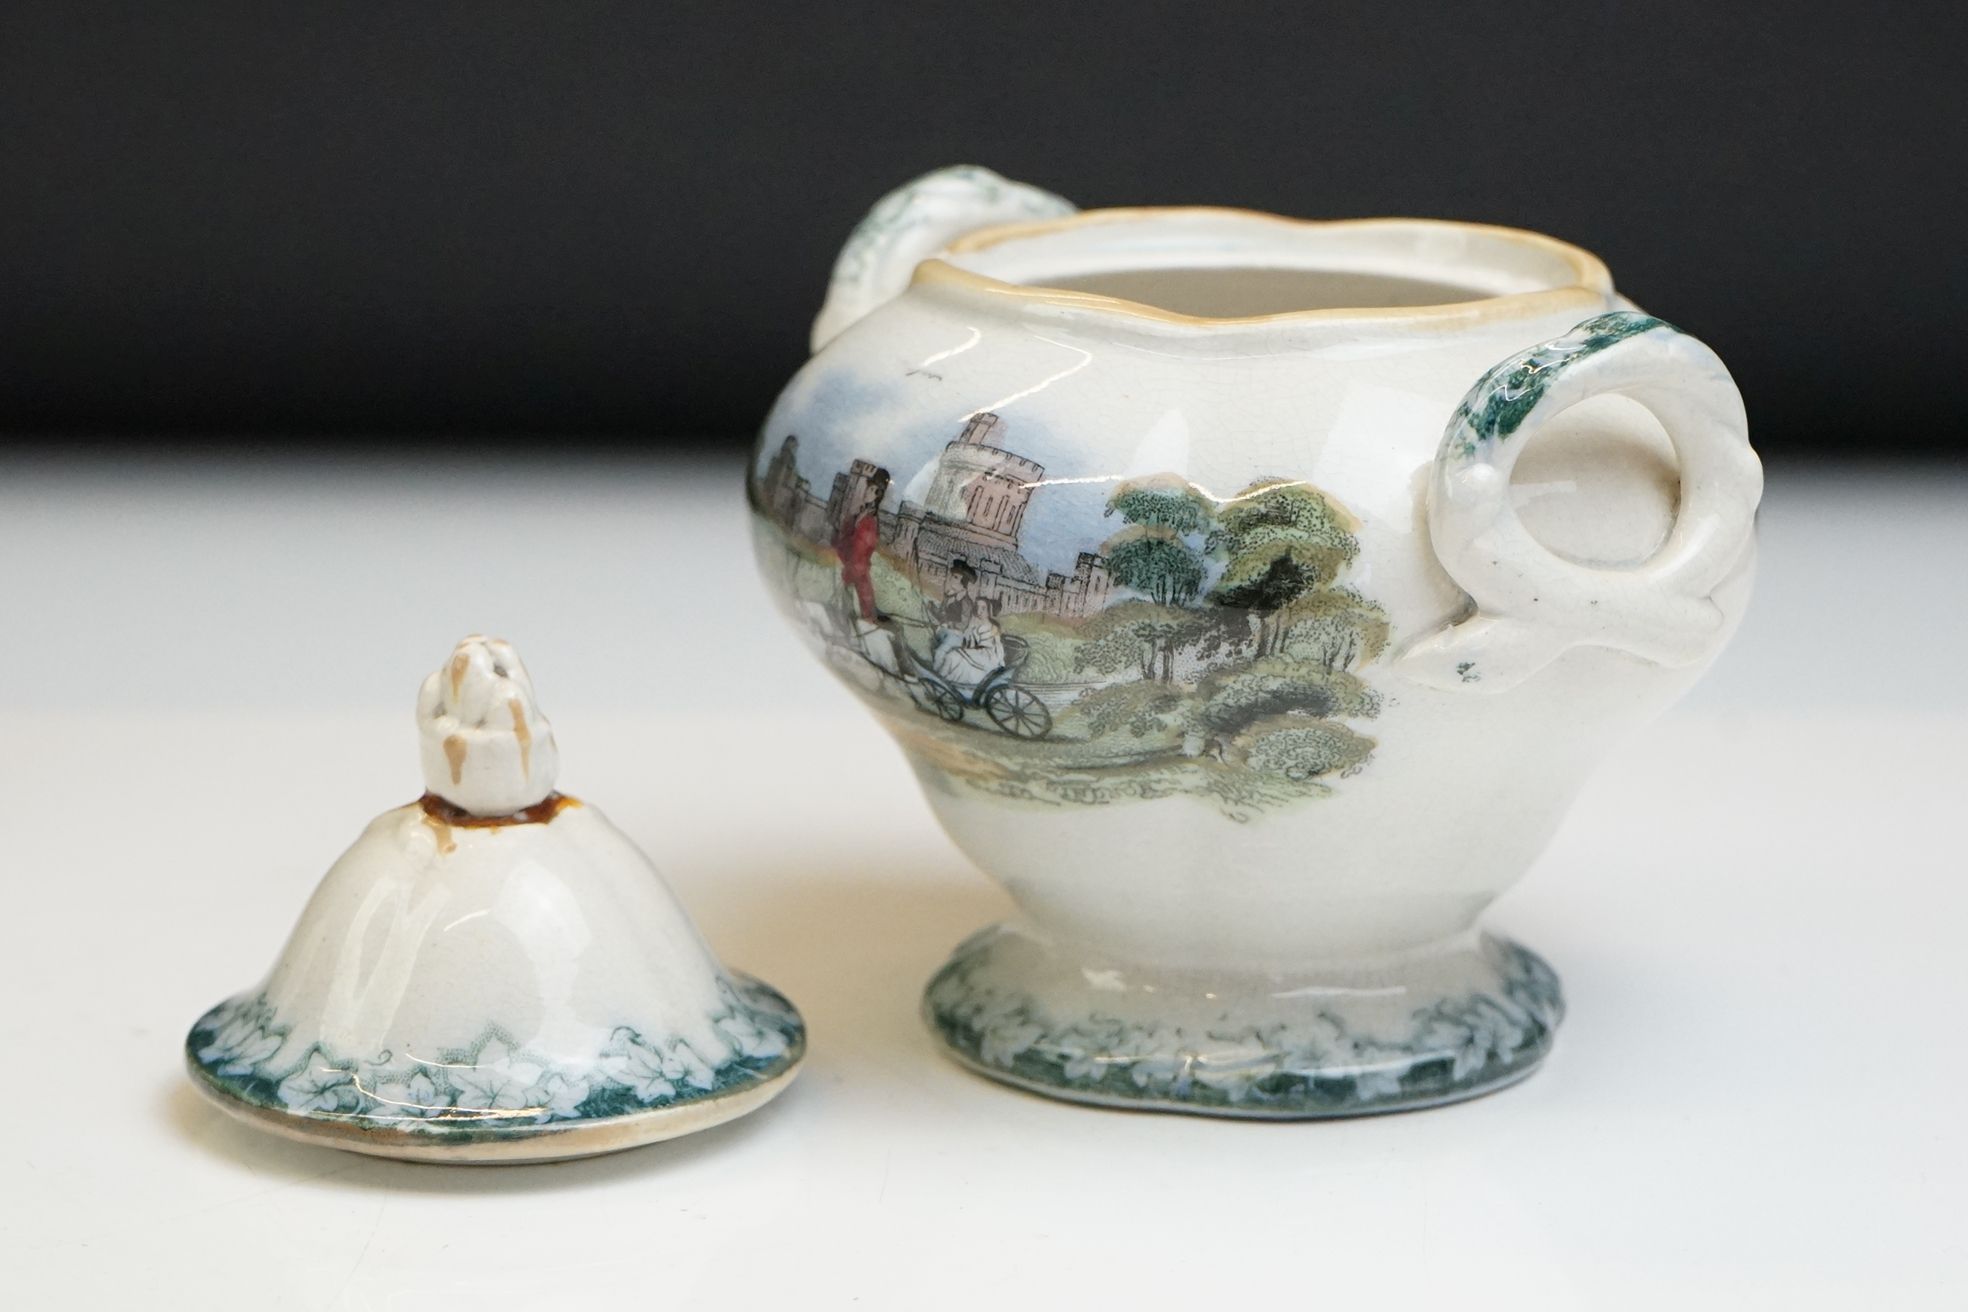 19th century Staffordshire Pottery Child's part Tea Set with transfer decoration of a goat pulling a - Image 7 of 10